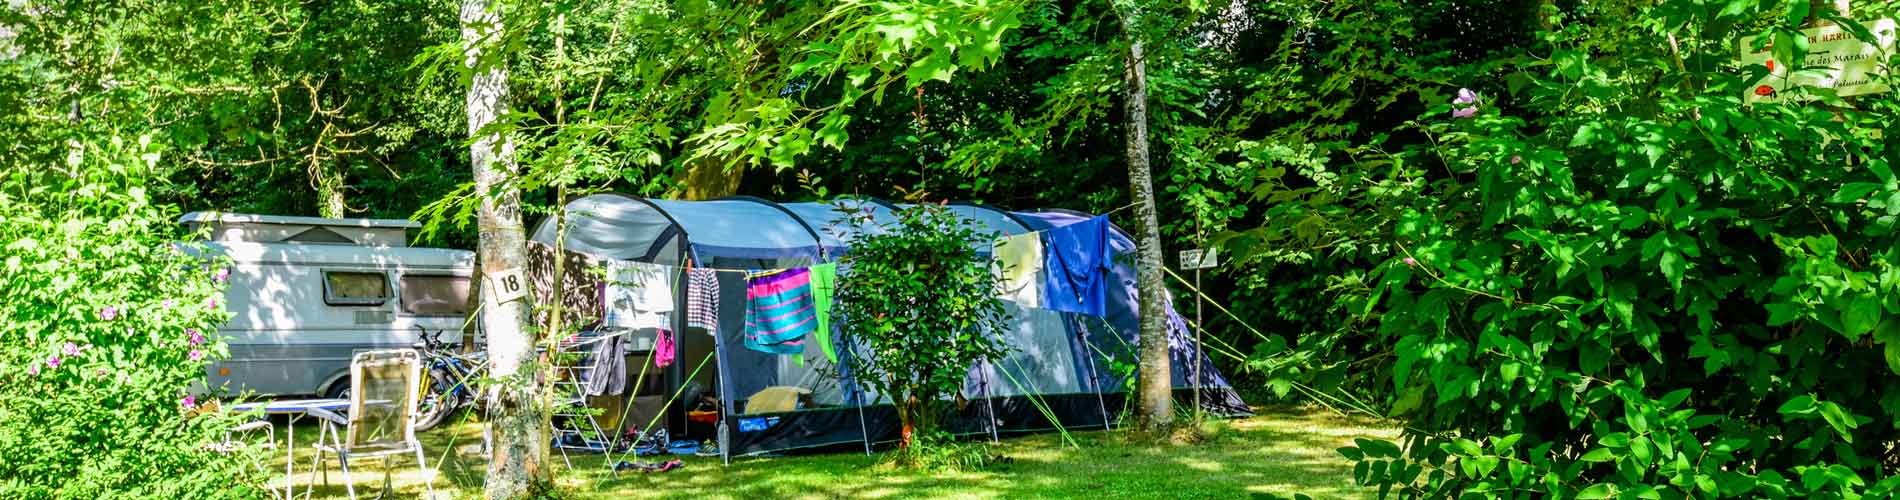 Emplacement camping Pays Basque